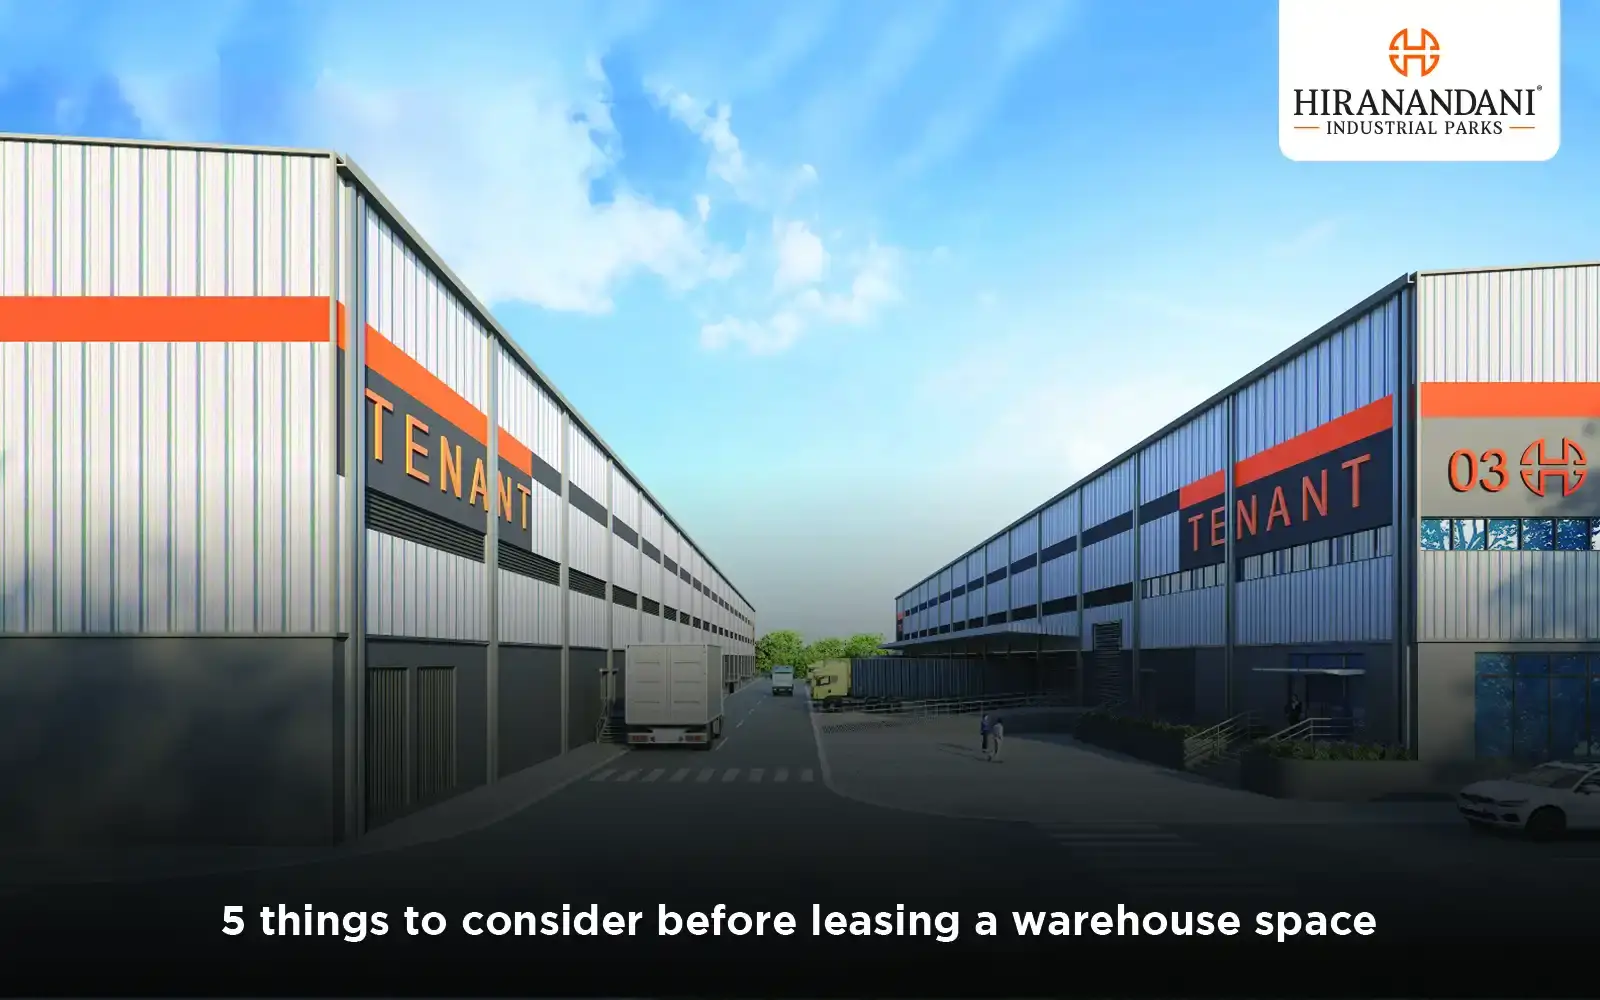 Factors to consider before leasing a warehouse space